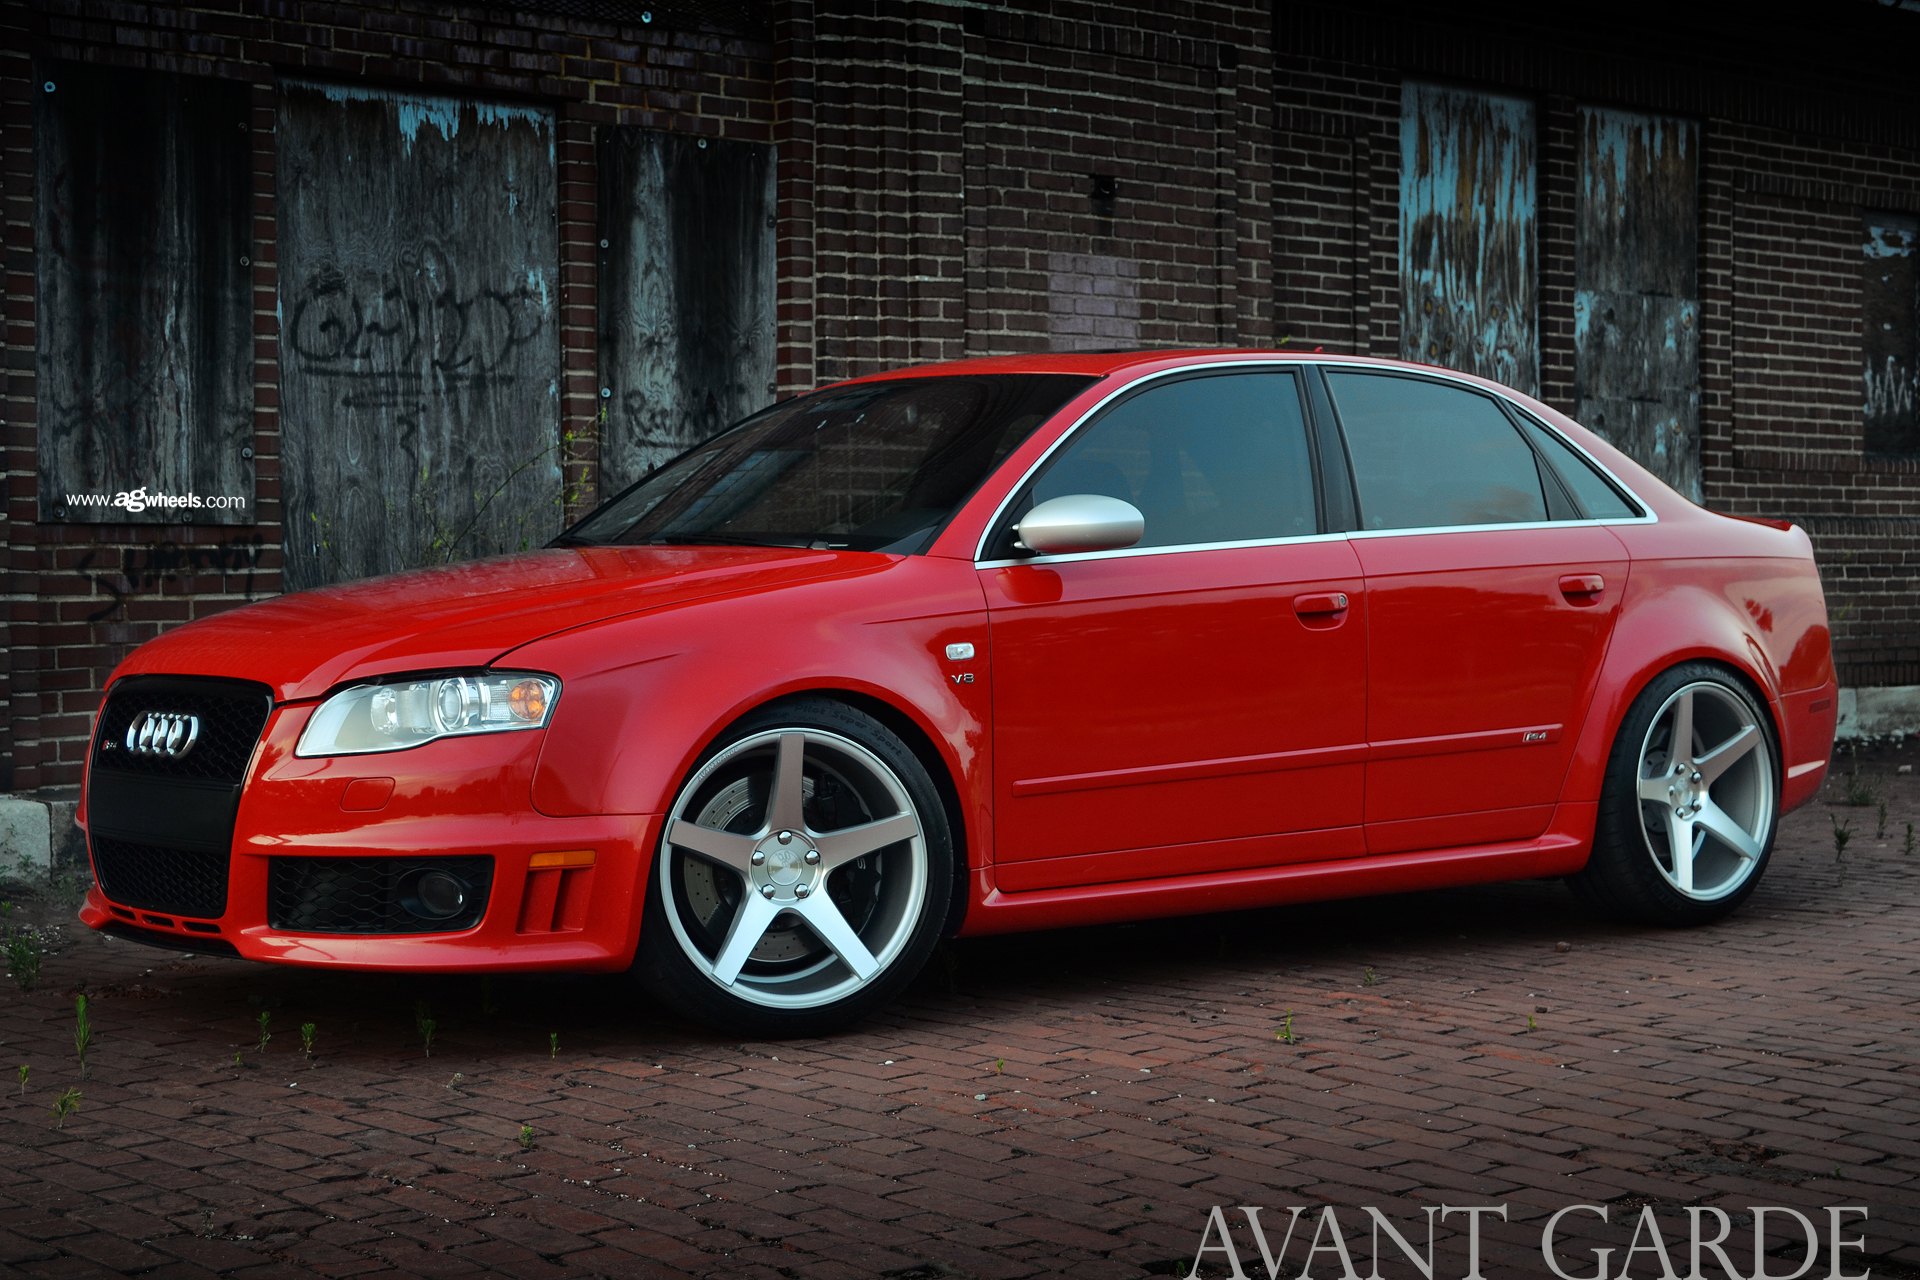 Aftermarket Projector Headlights on Red Audi S4 - Photo by Avant Garde Wheels